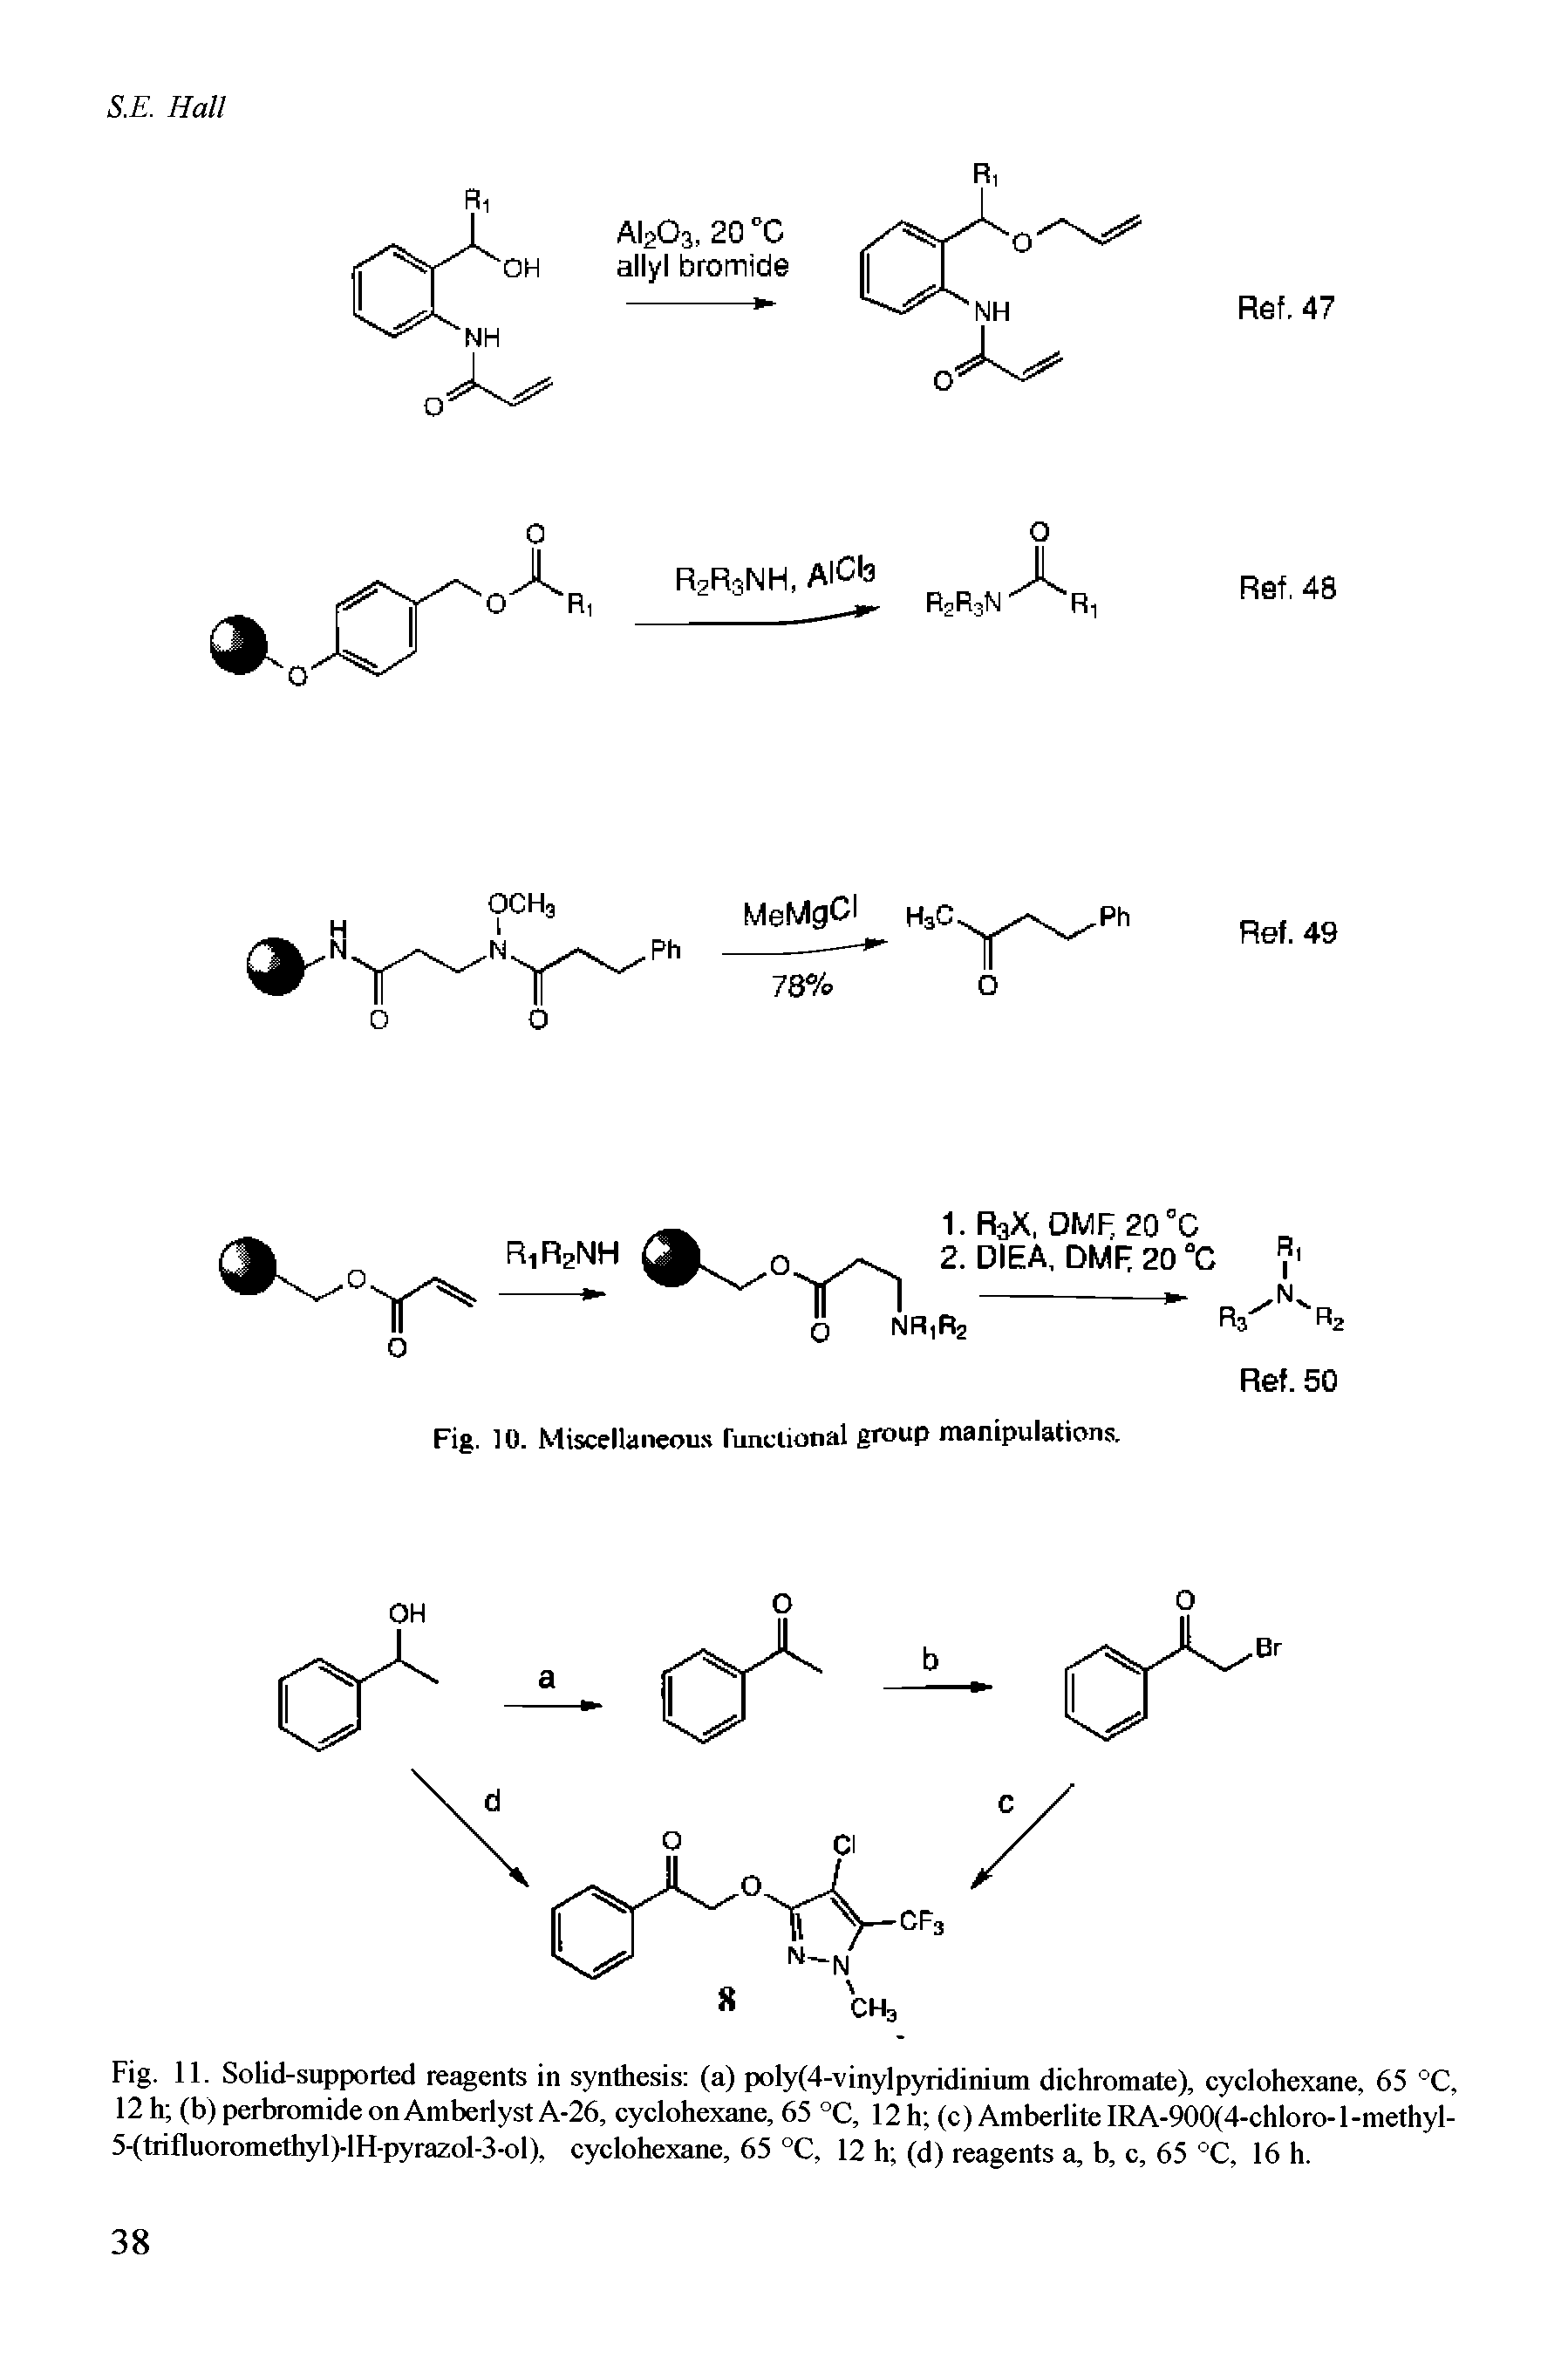 Fig. 11. Solid-supported reagents in synthesis (a) poly(4-vinylpyridinium dichromate), cyclohexane, 65 °C, 12h (b)perbromideonAmberlyst A-26, cyclohexane, 65 °C, 12h (c) AmberliteIRA-900(4-chloro-l-methyl-5-(trifluoromethyl)4H-pyrazol-3-ol), cyclohexane, 65 °C, 12 h (d) reagents a, b, c, 65 °C, 16 h.